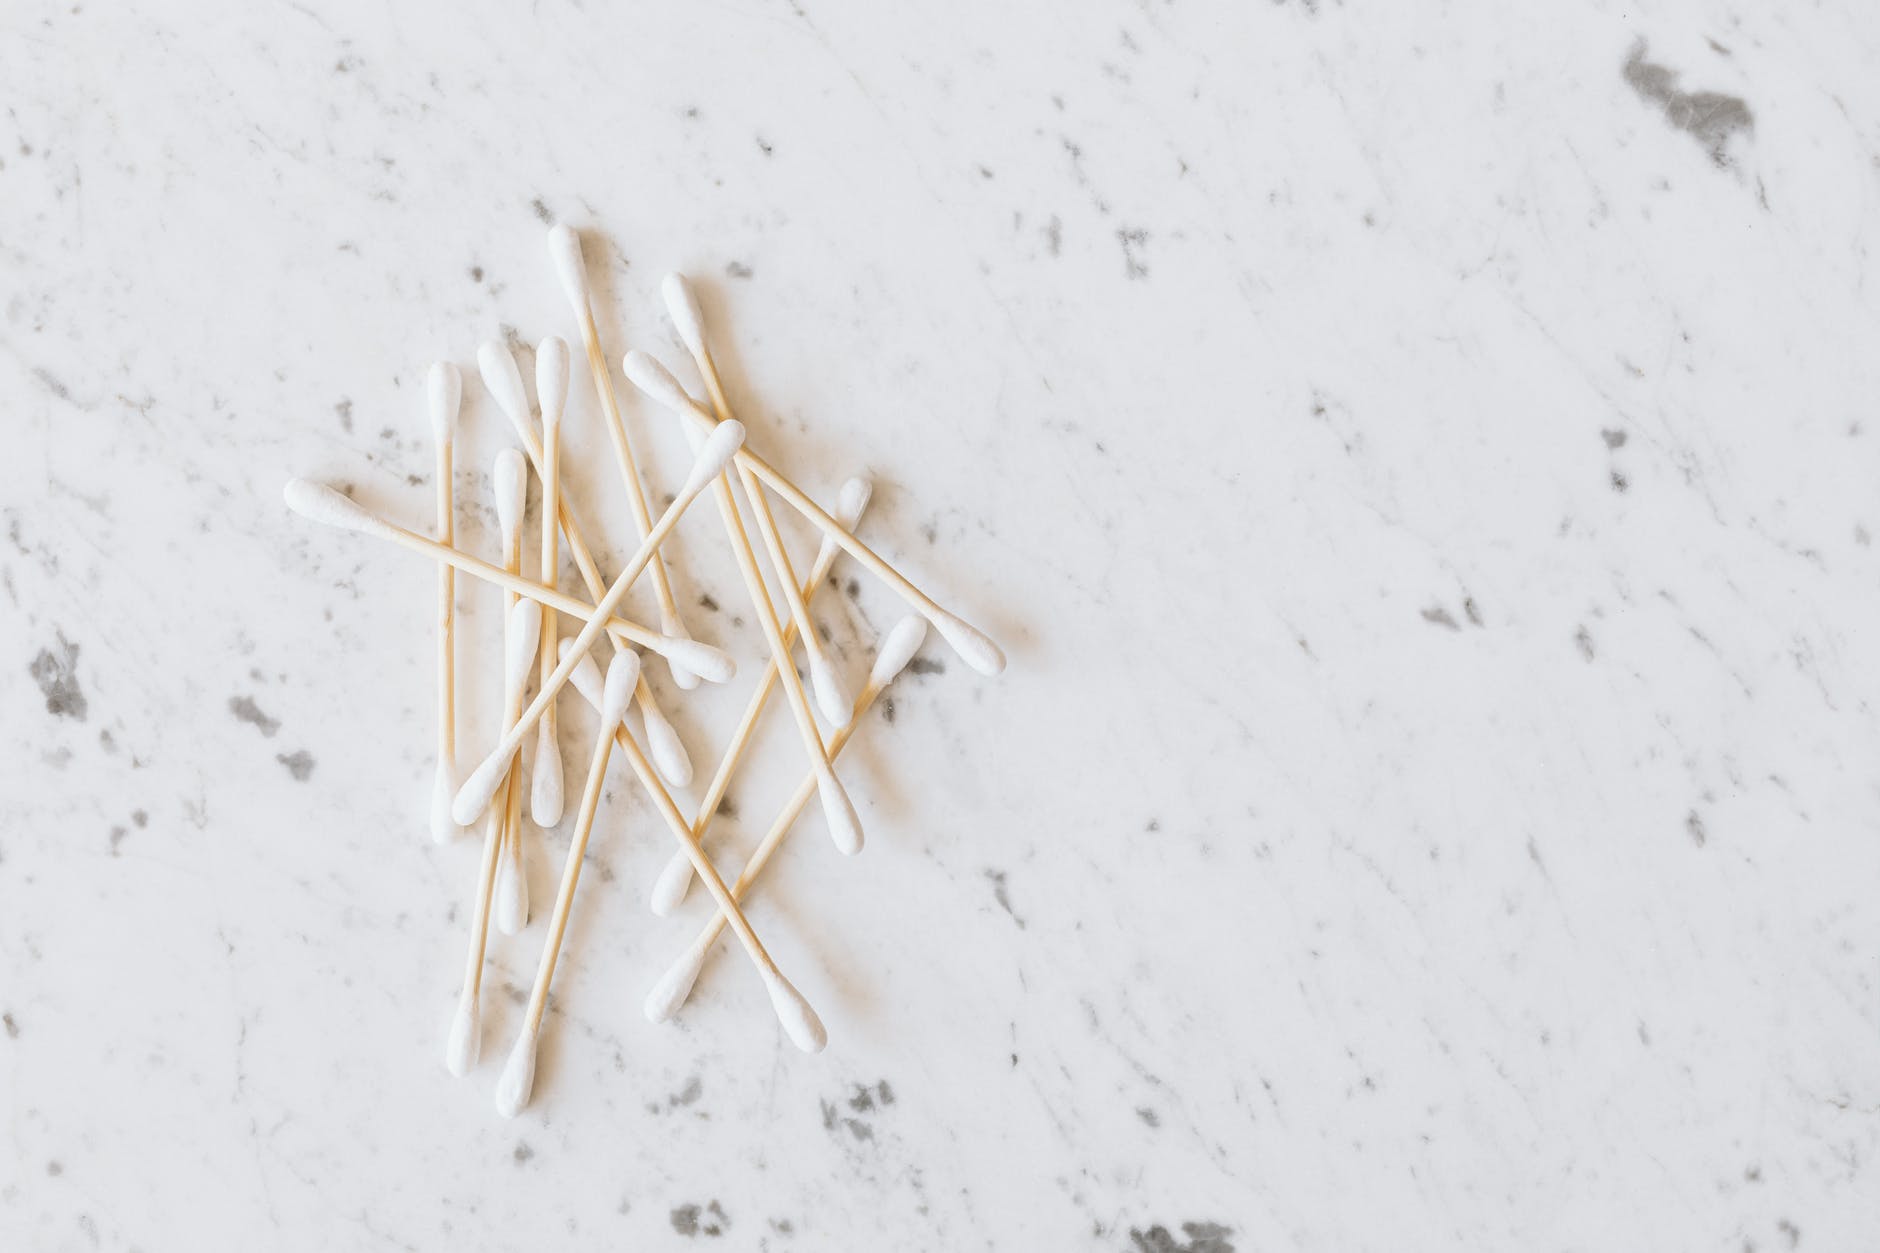 Cotton Swabs for Ear Cleaning: Yay or Nay?